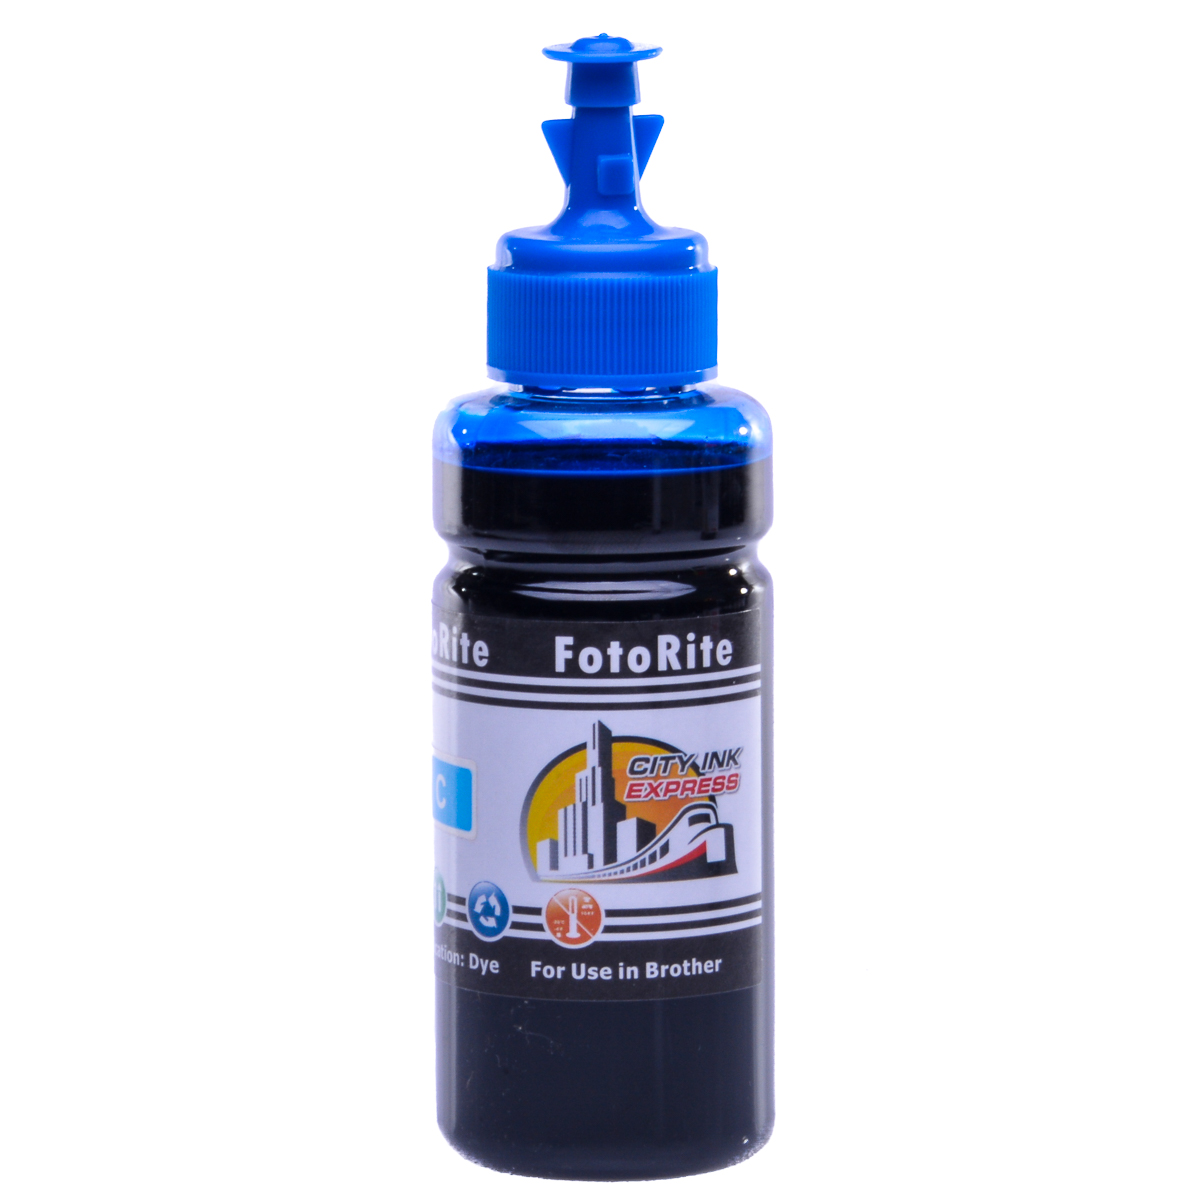 Cheap Cyan dye ink replaces Brother MFC-T800W - BT5000C